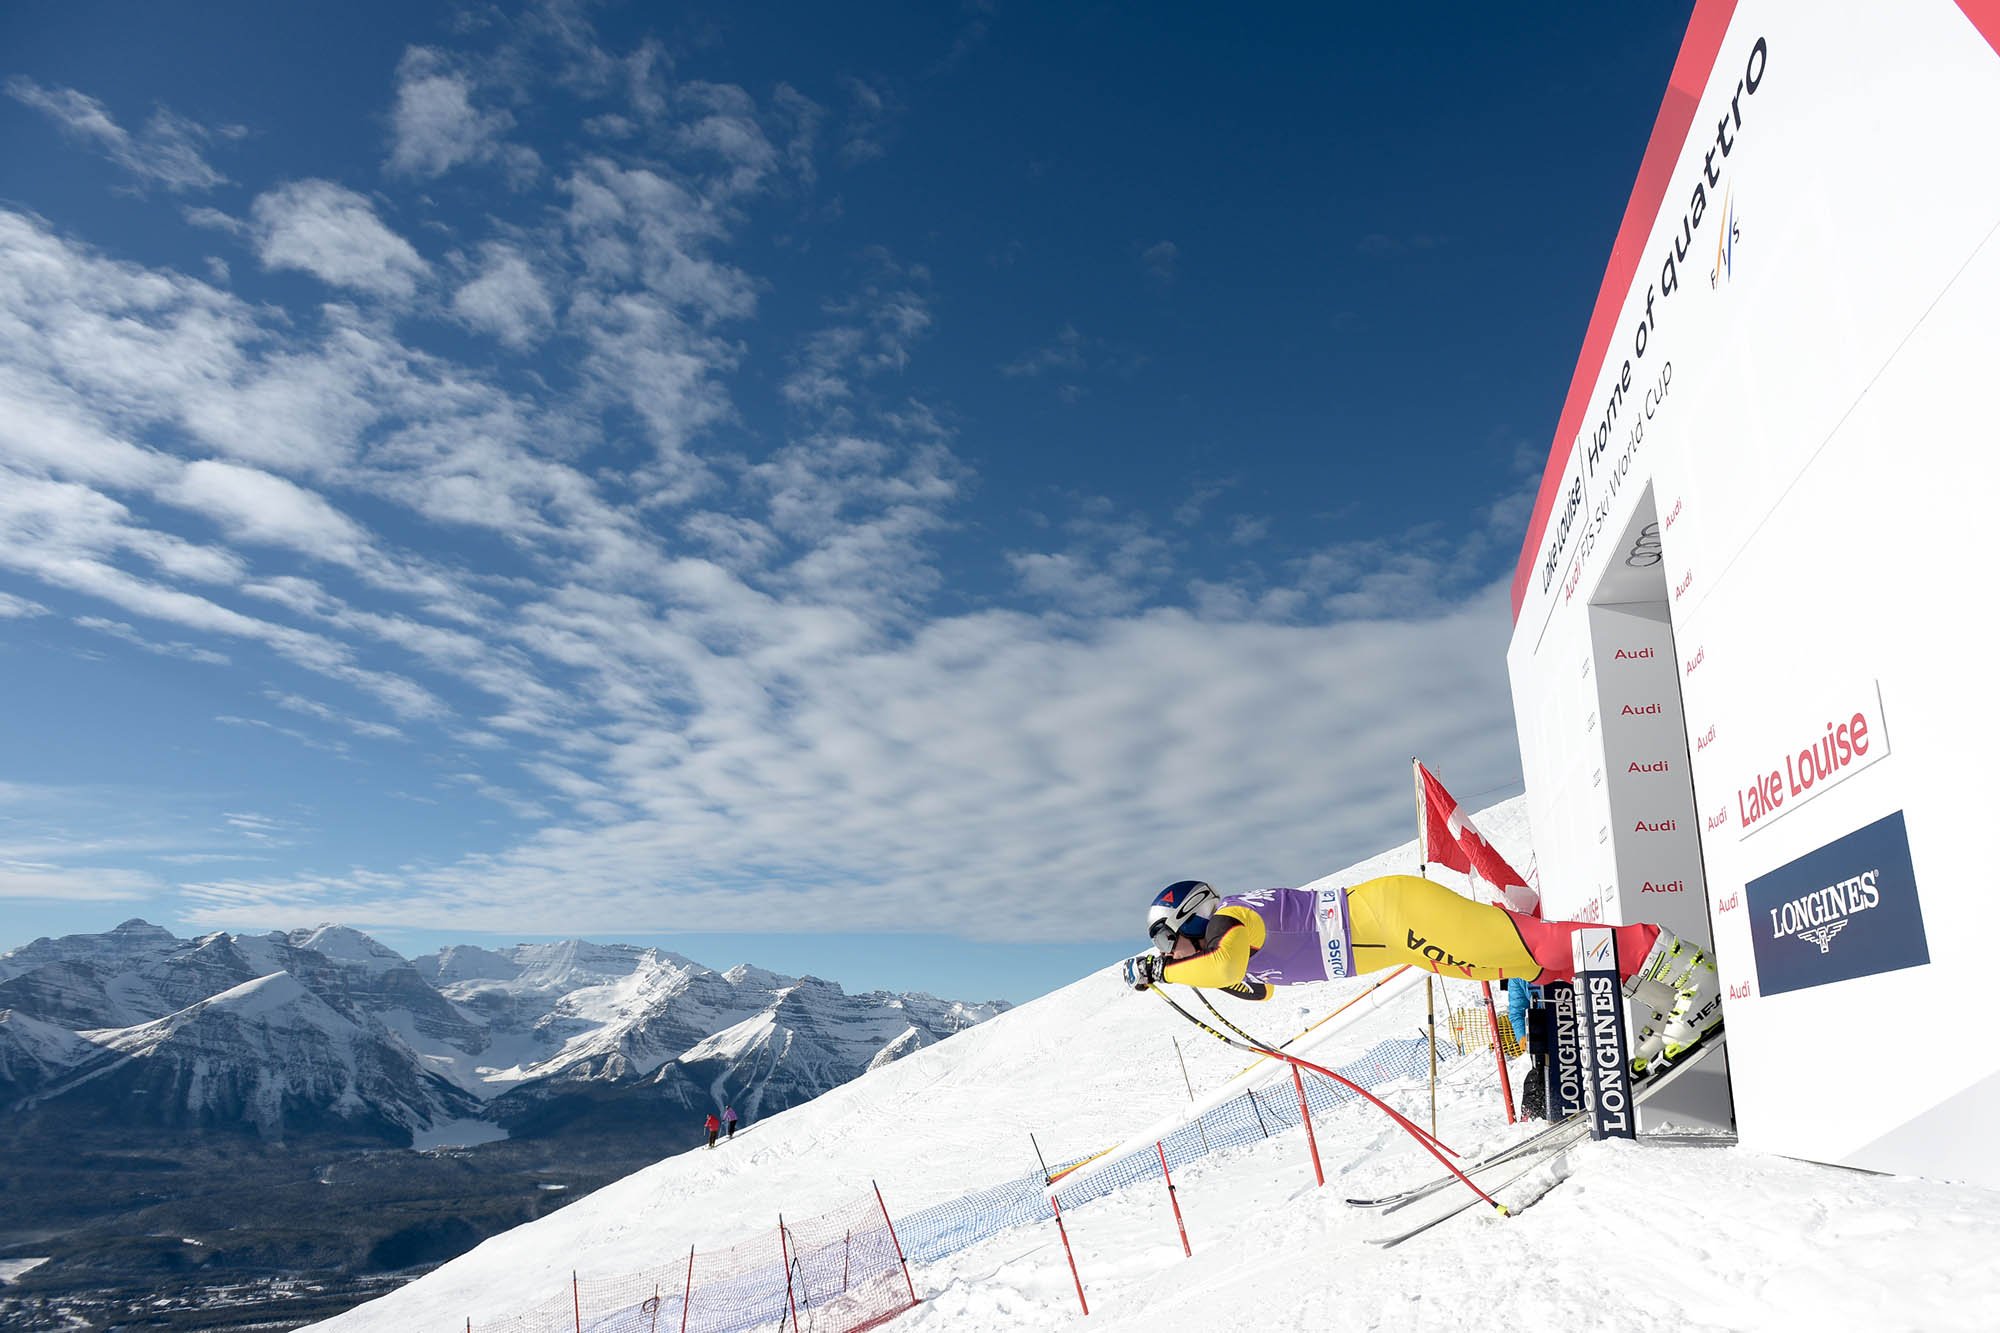 fis-removes-lake-louise-ab-from-23-24-alpine-world-cup-calendar